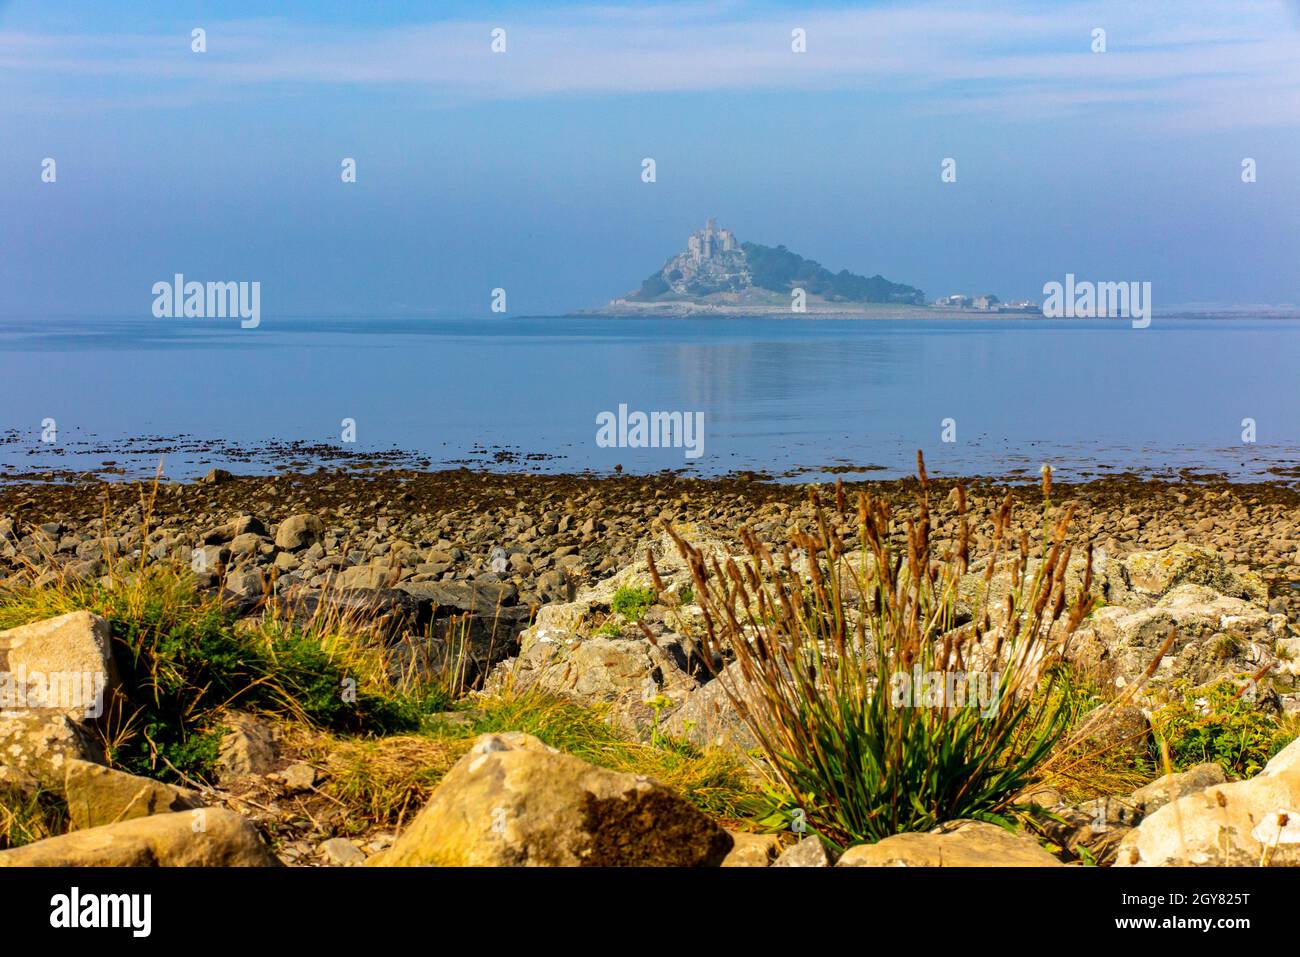 St Michael's Mount seen from the South West Coast Path near Perranuthnoe on the southern coast of Cornwall England UK Stock Photo